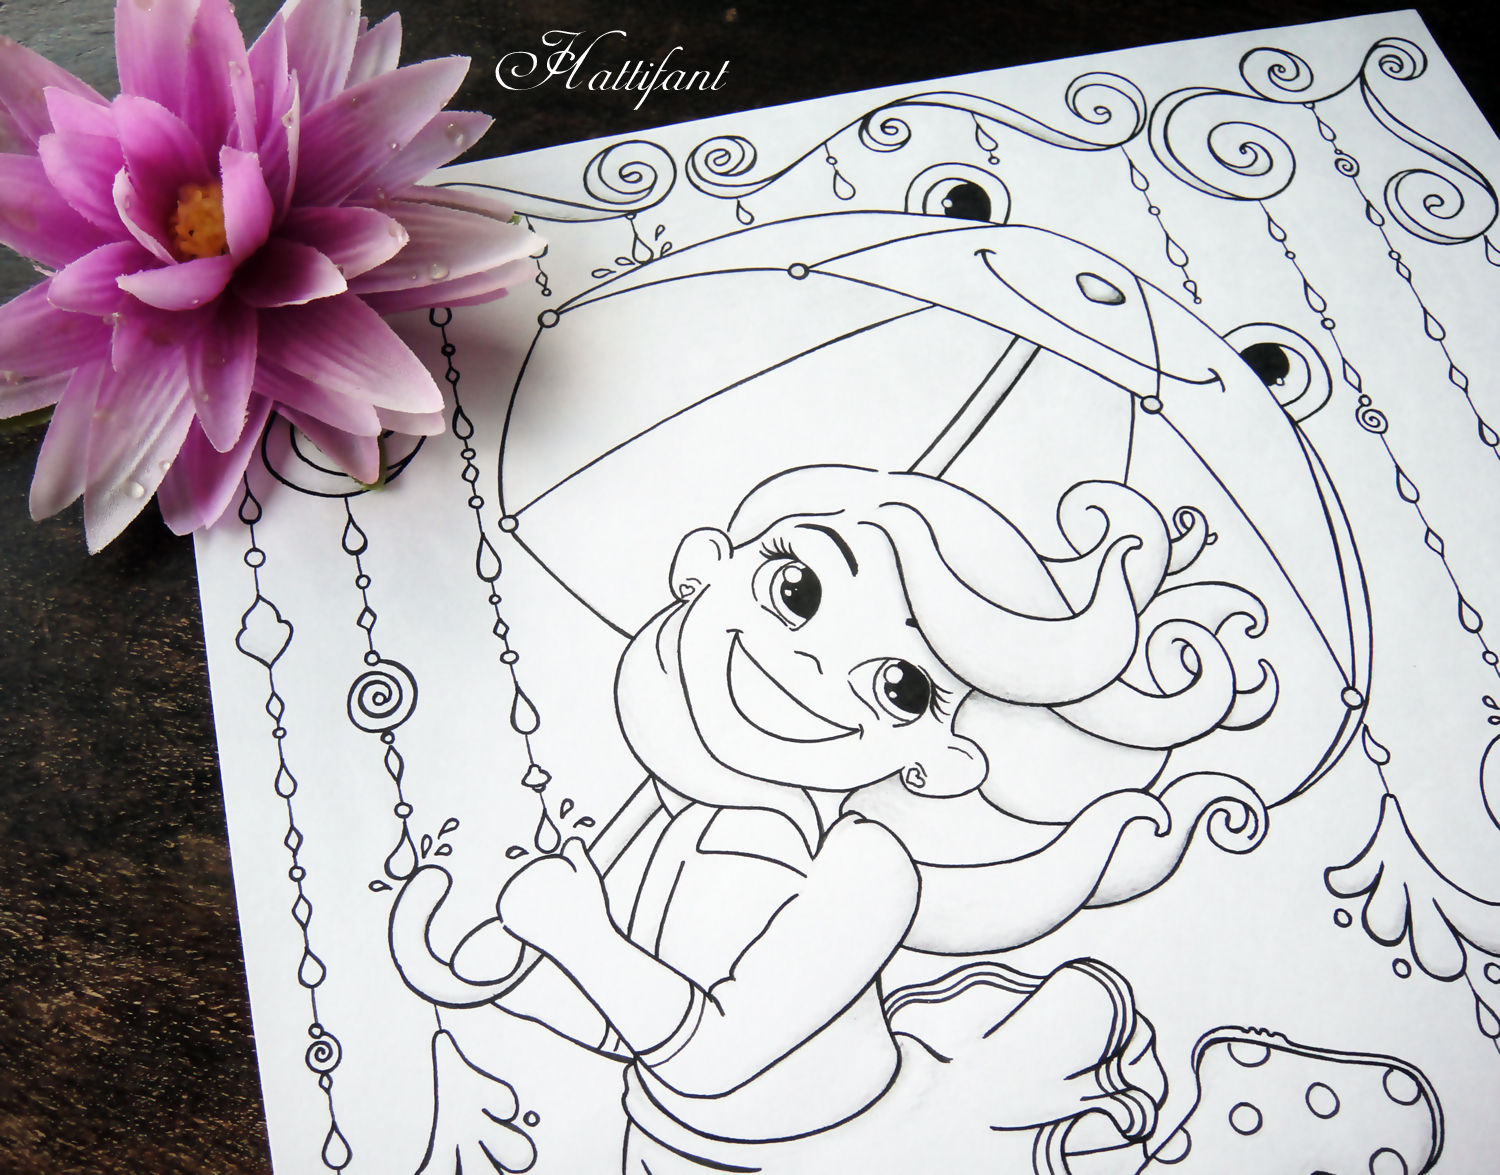 Hattifant's Rainy Day Coloring Page - Vivian Greene Quote